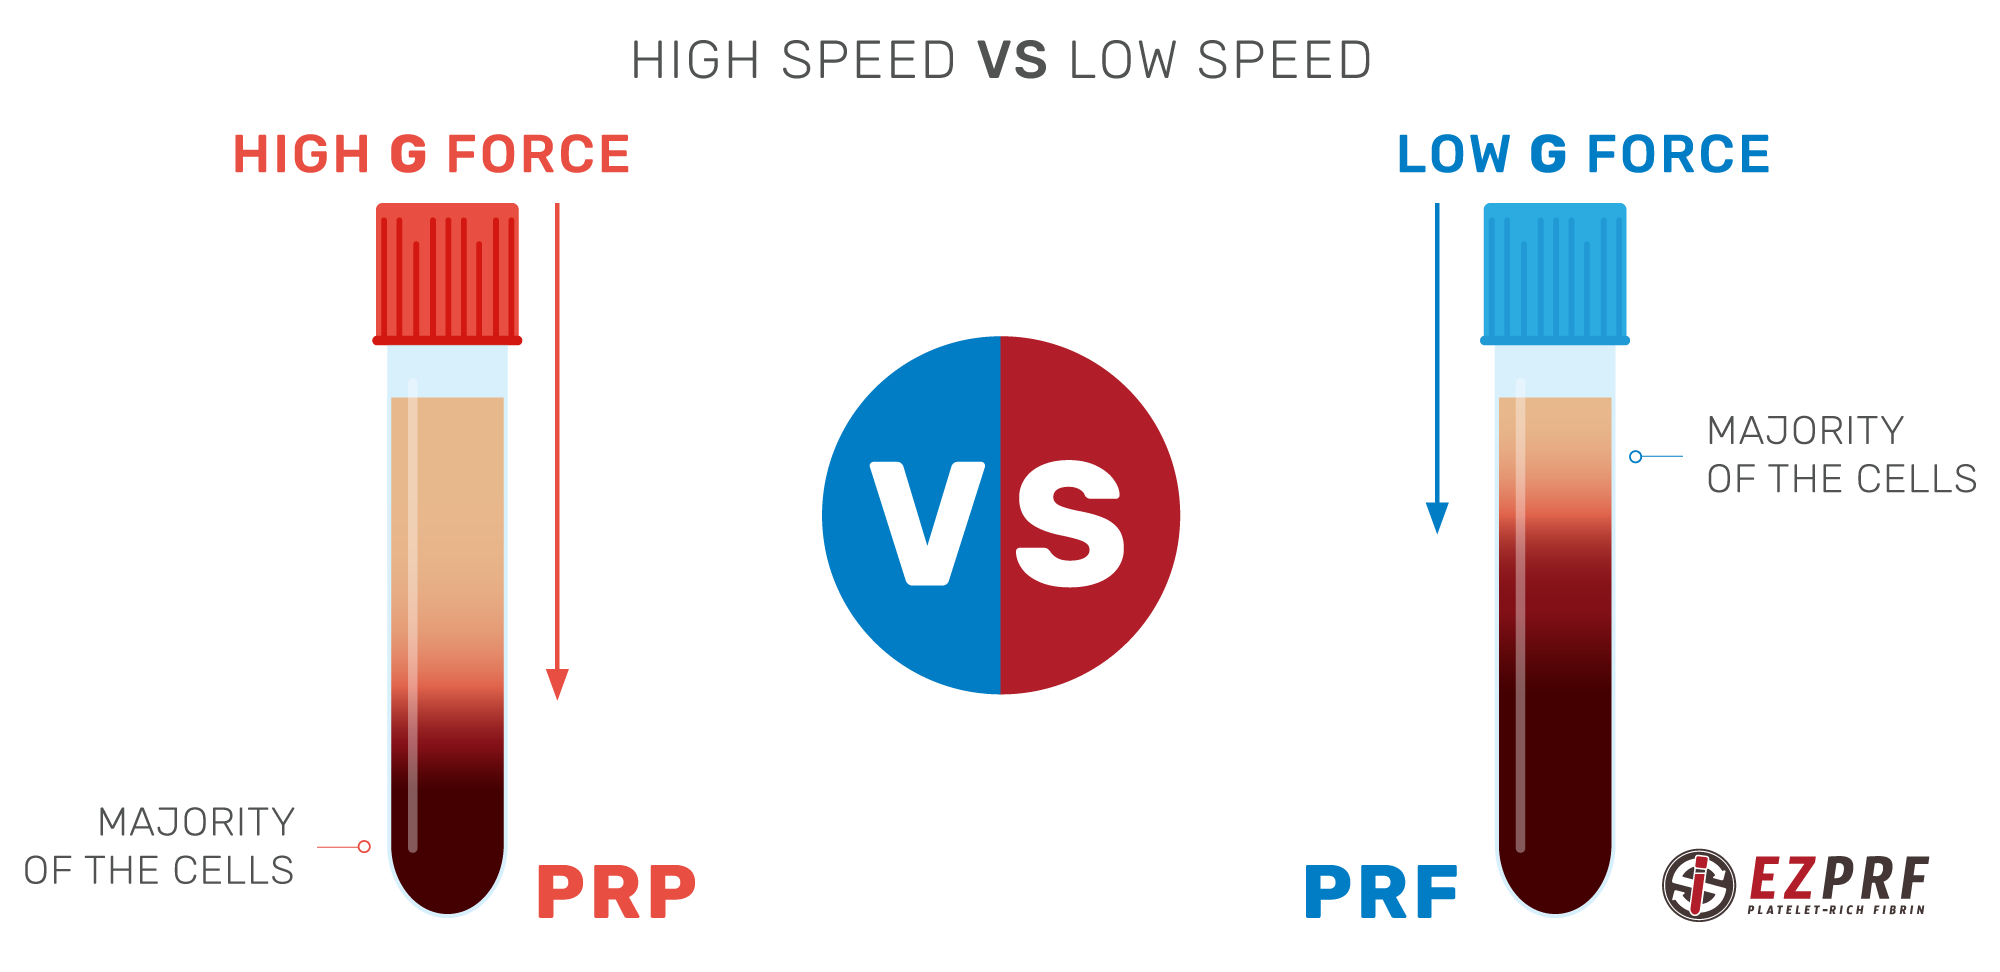 prf versus prp difference